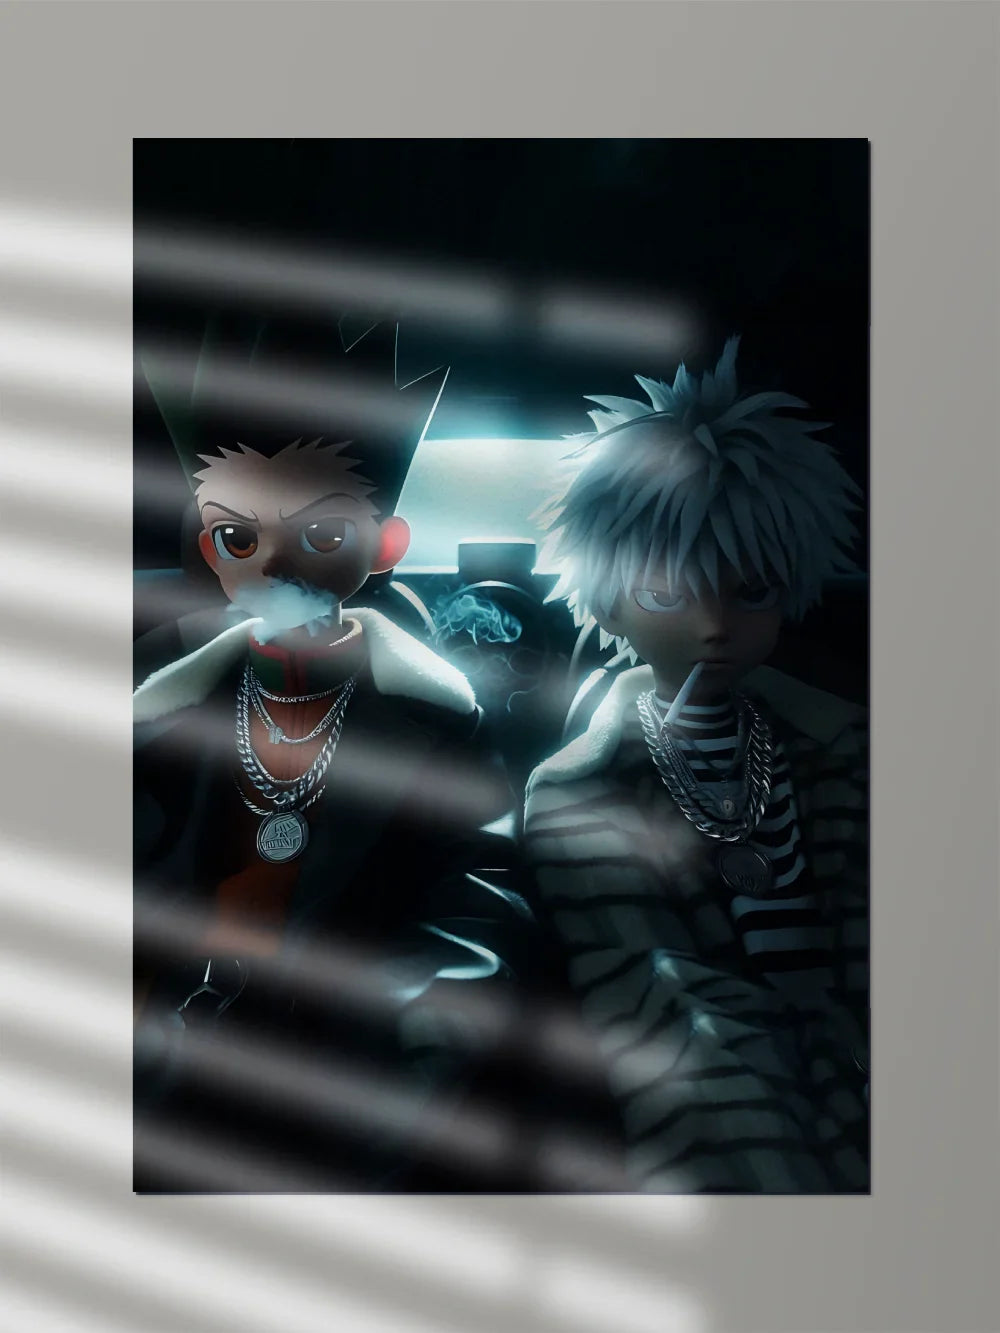 Gon x Zoldic Ft. Rappers Concept Art | Anime Poster